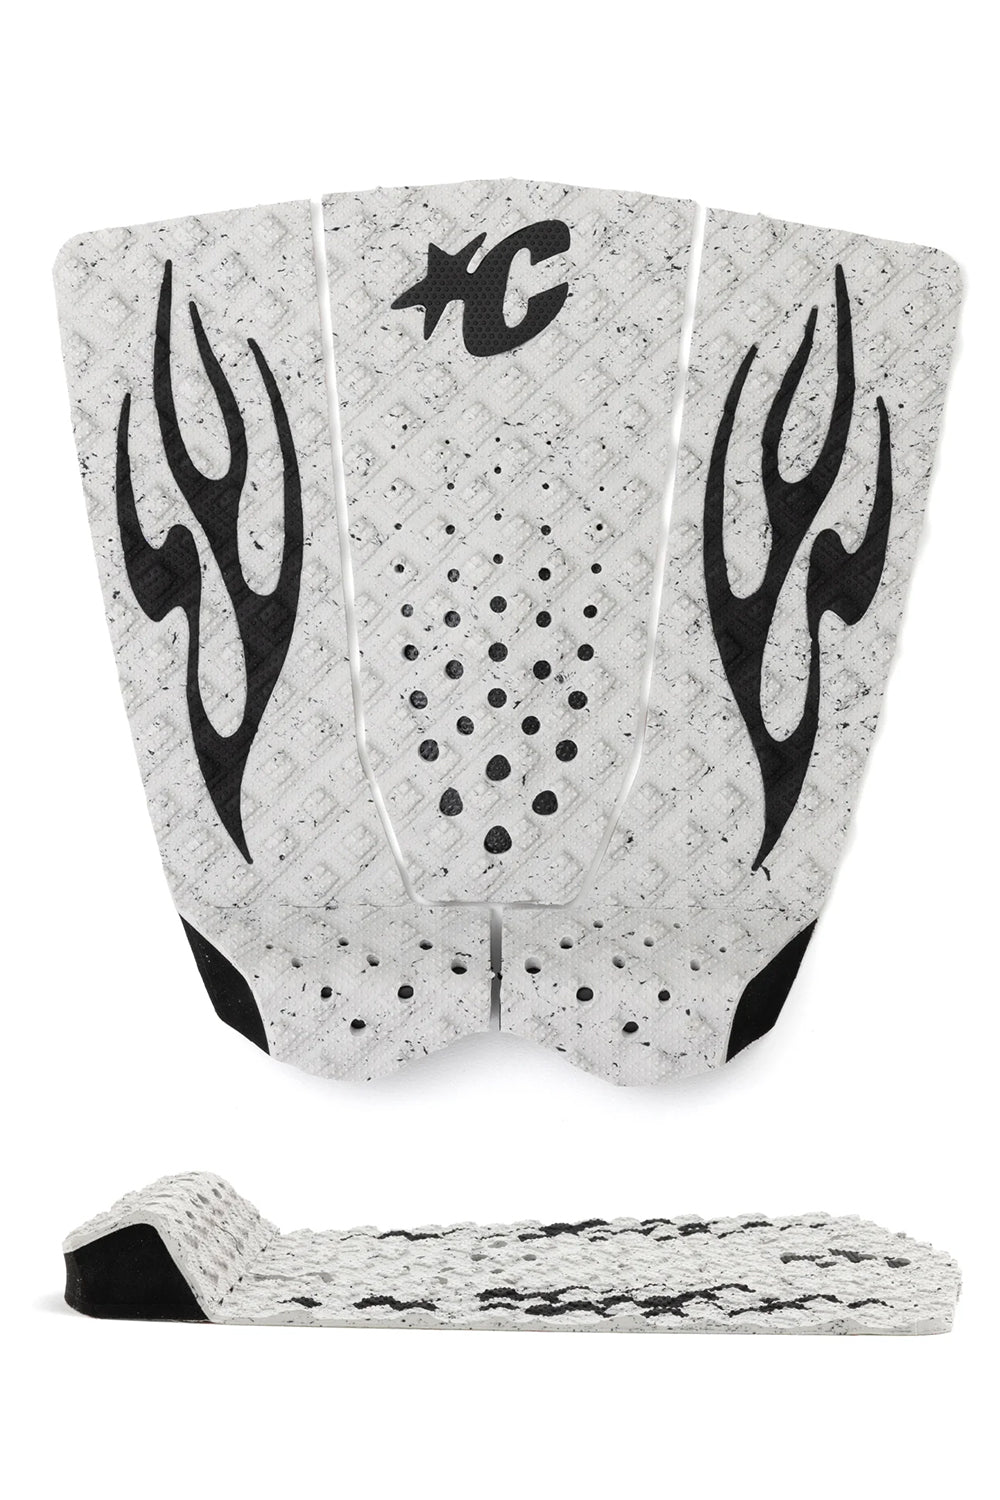 Creatures of Leisure Griffin Colapinto LITE Eco Pure Grip Pad